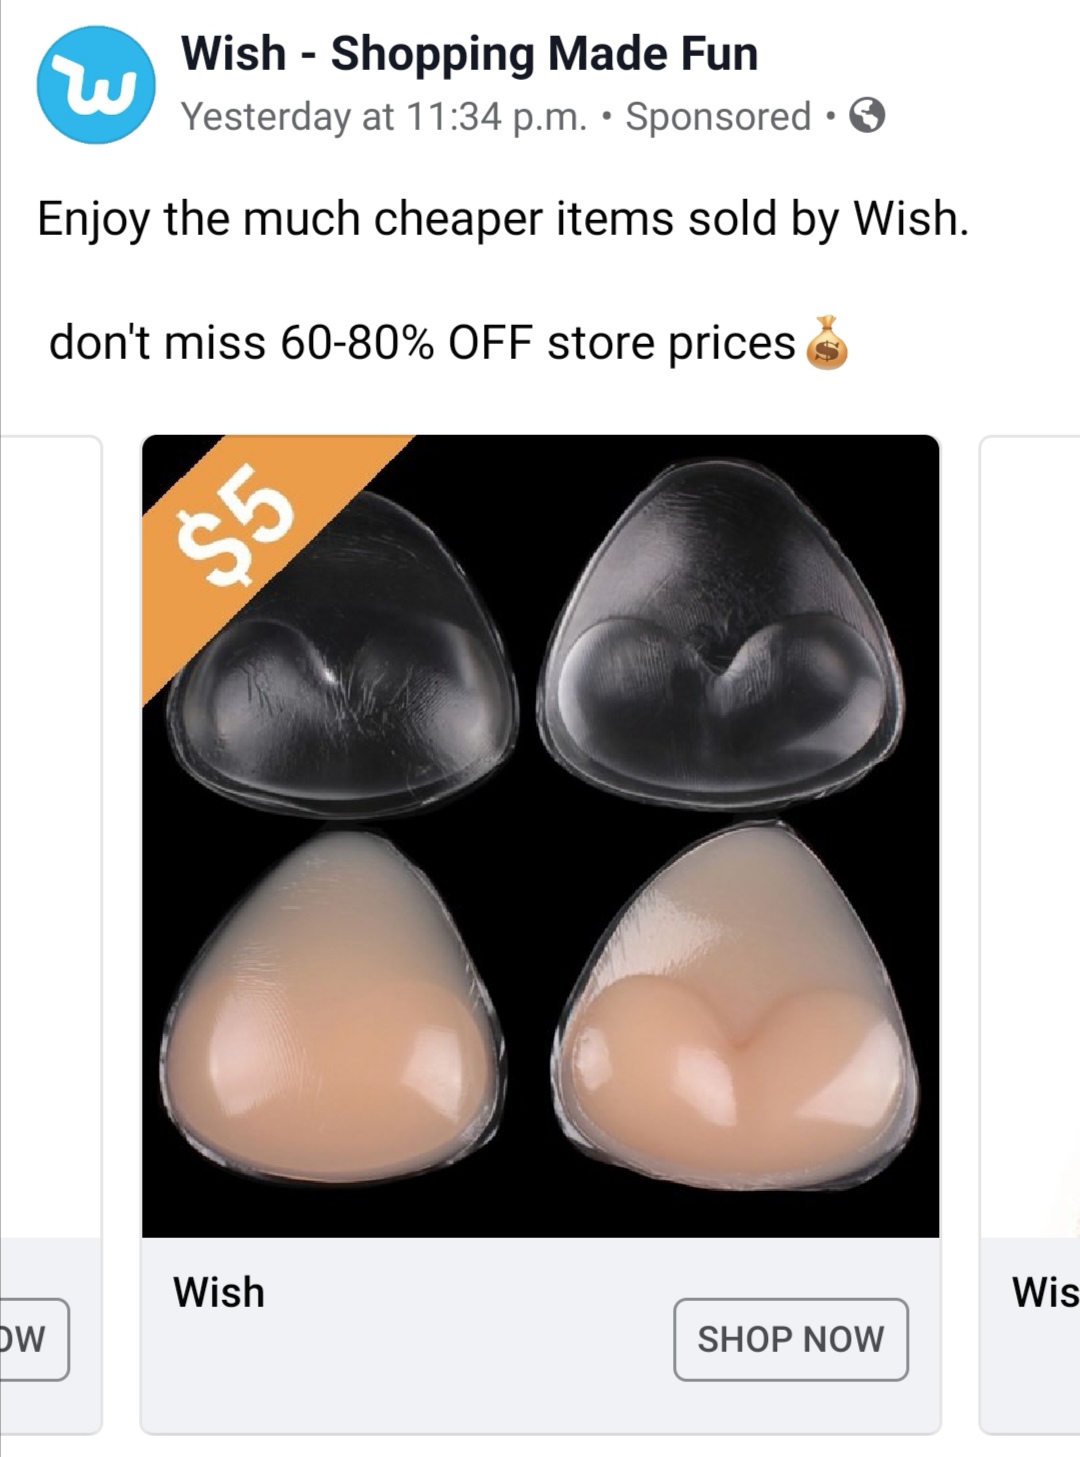 Wish Shopping Made Fun Yesterday at p.m. Sponsored Enjoy the much cheaper items sold by Wish. don't miss 6080% Off store prices $ $5 Wish Wis Dw Shop Now